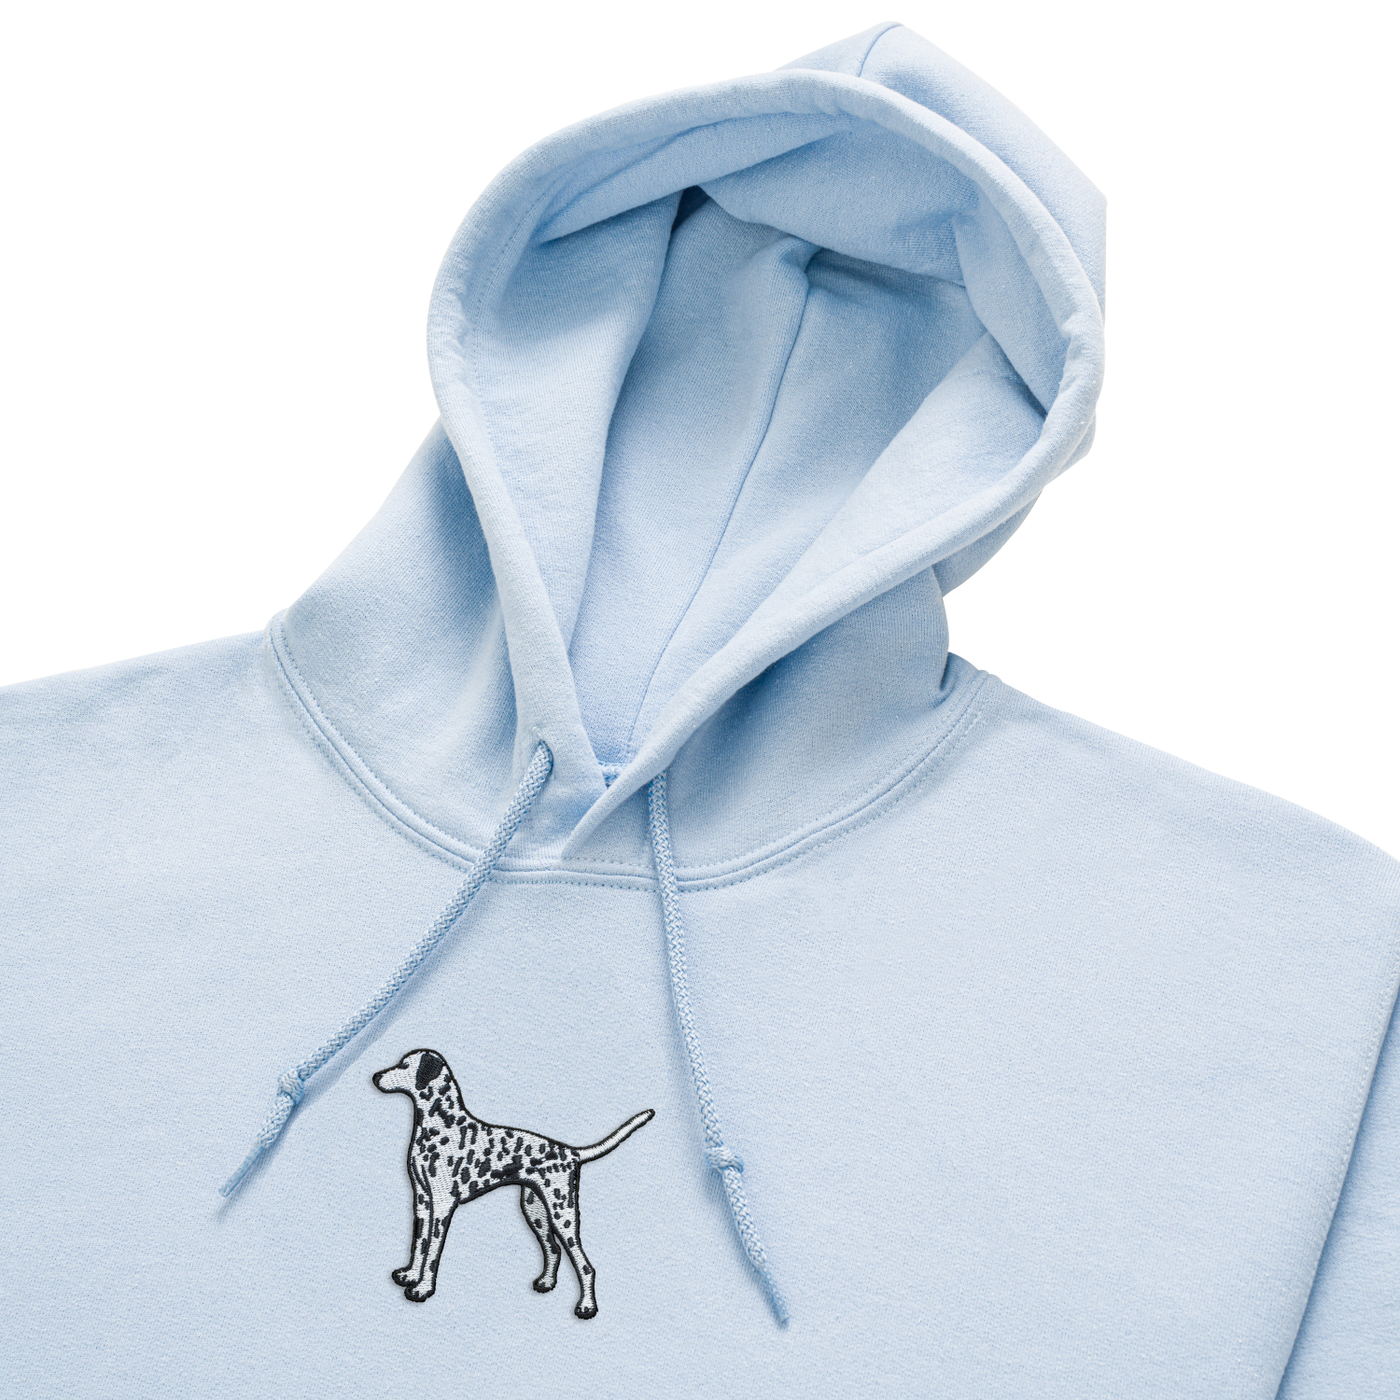 Bobby's Planet Women's Embroidered Dalmatian Hoodie from Paws Dog Cat Animals Collection in Light Blue Color#color_light-blue